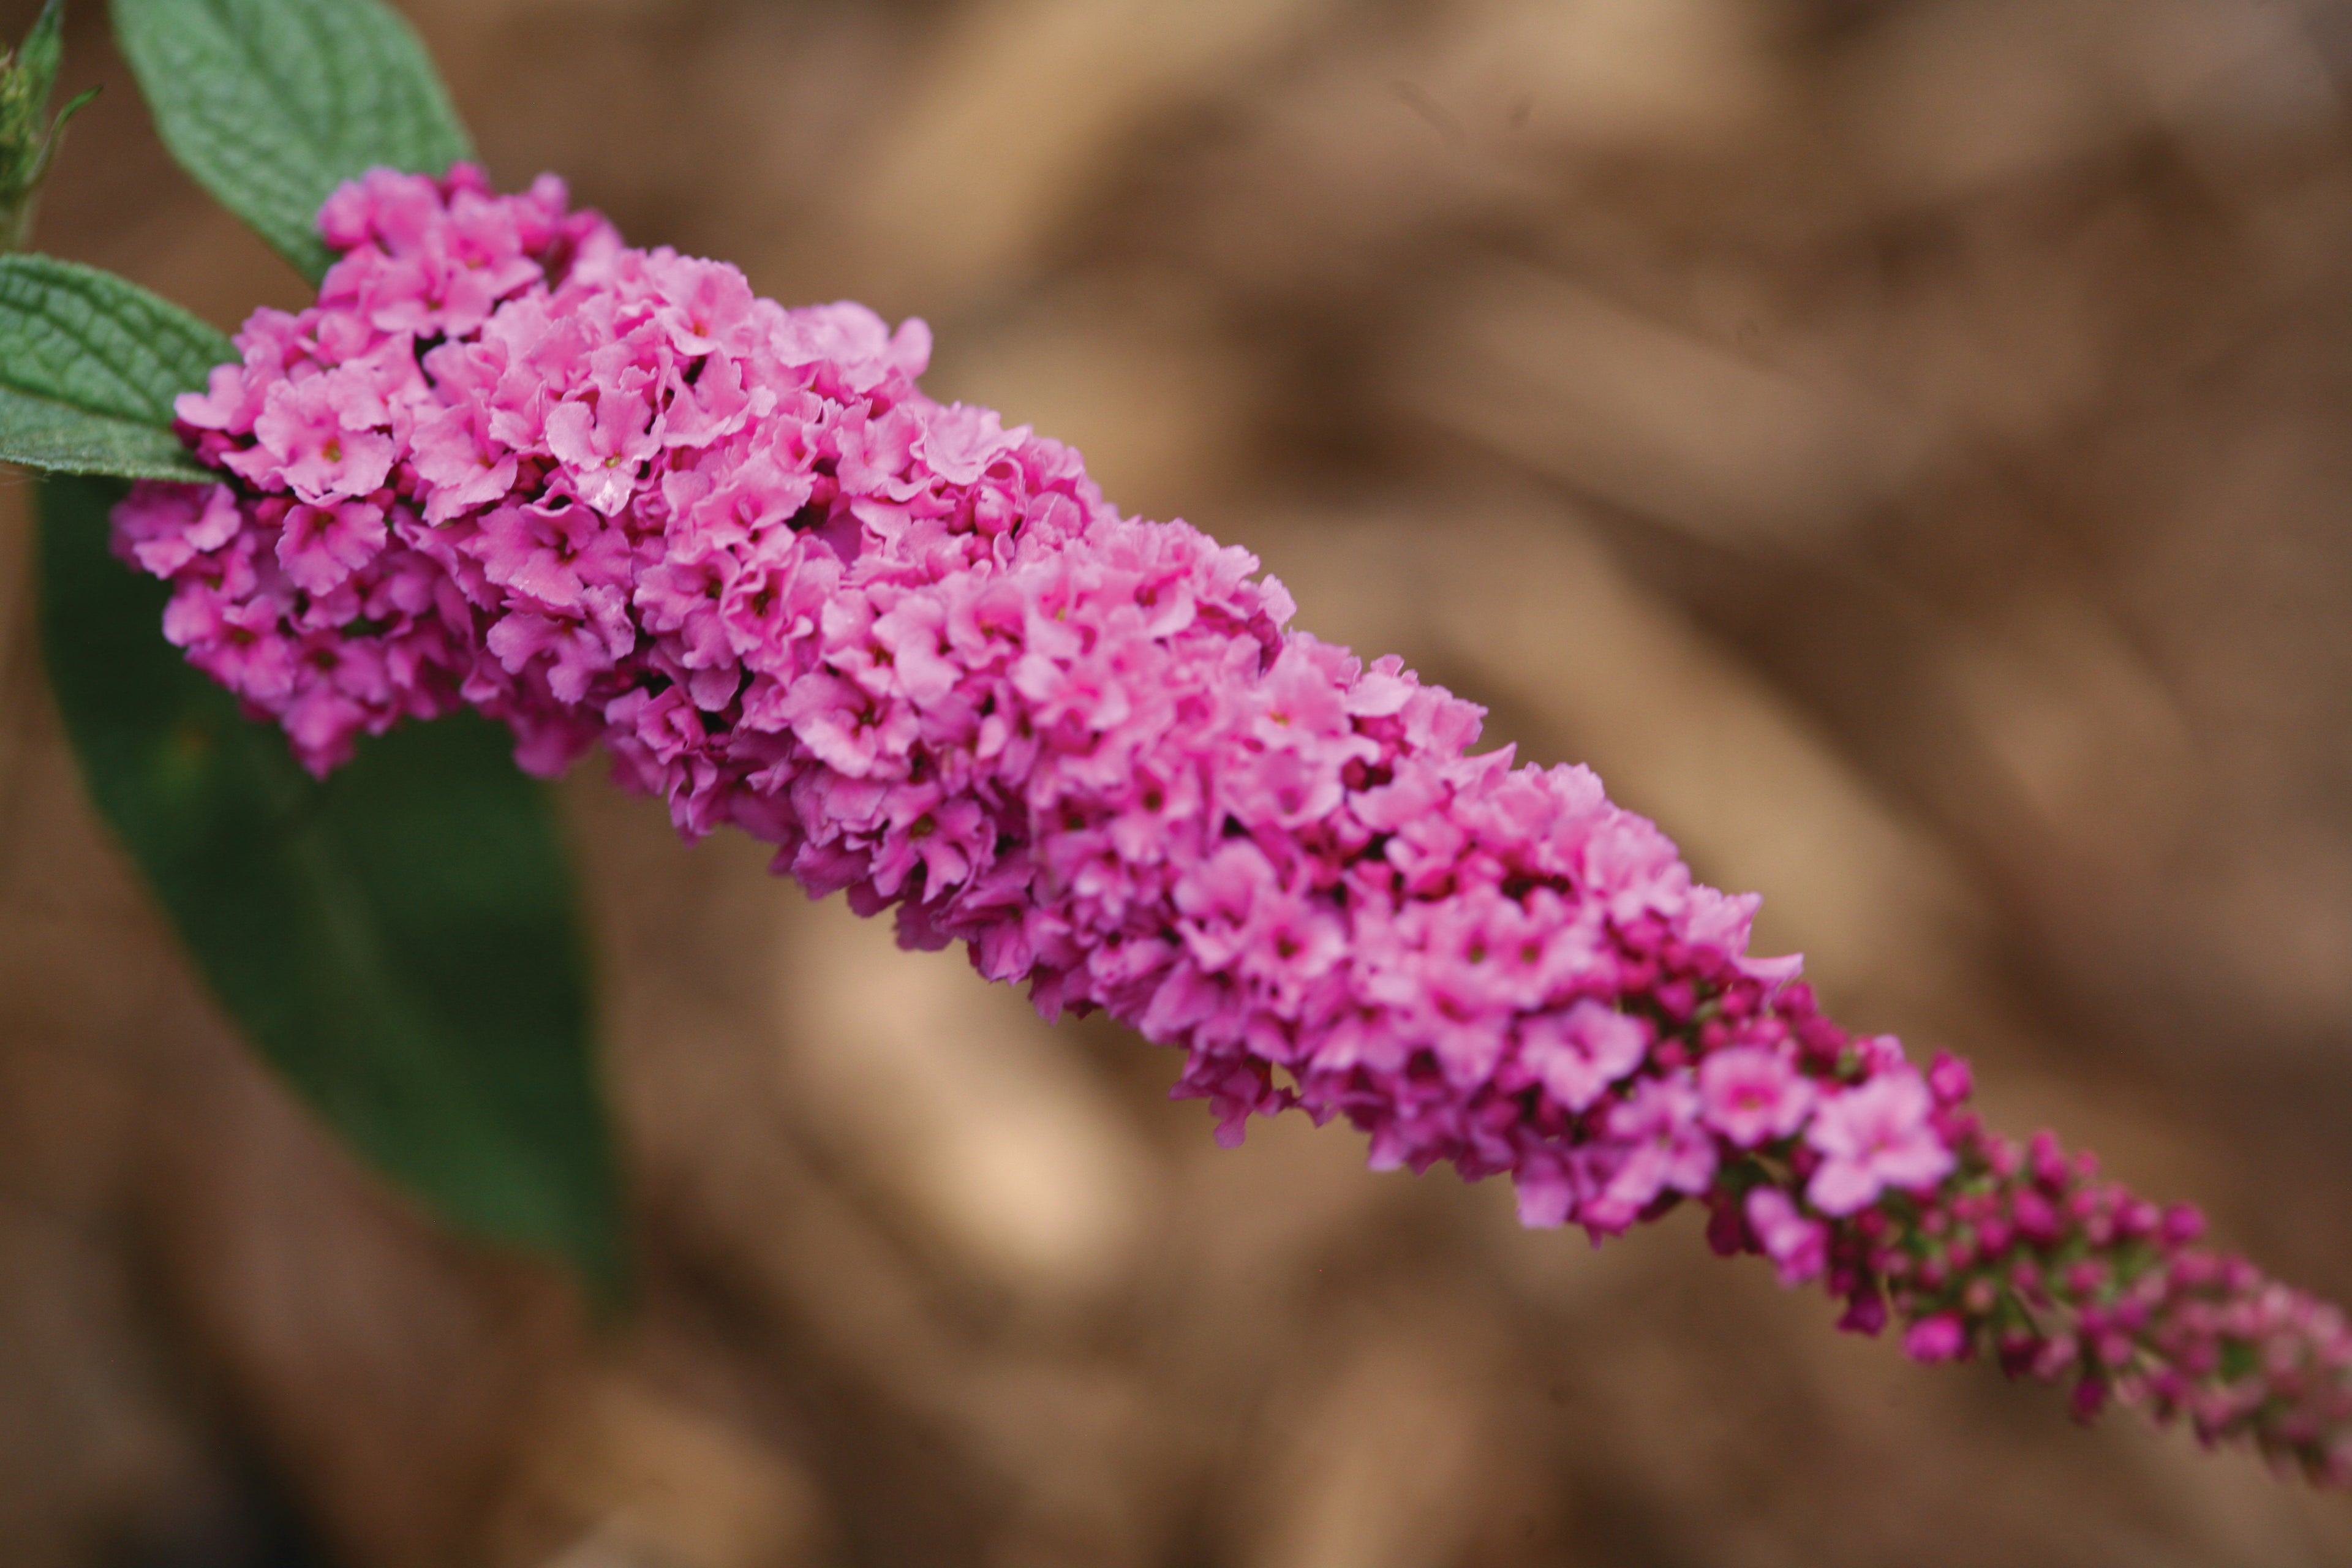 Buddleia Lo &amp; Behold Pink Micro Chip has pink blooms that attract butterflies and hummingbirds